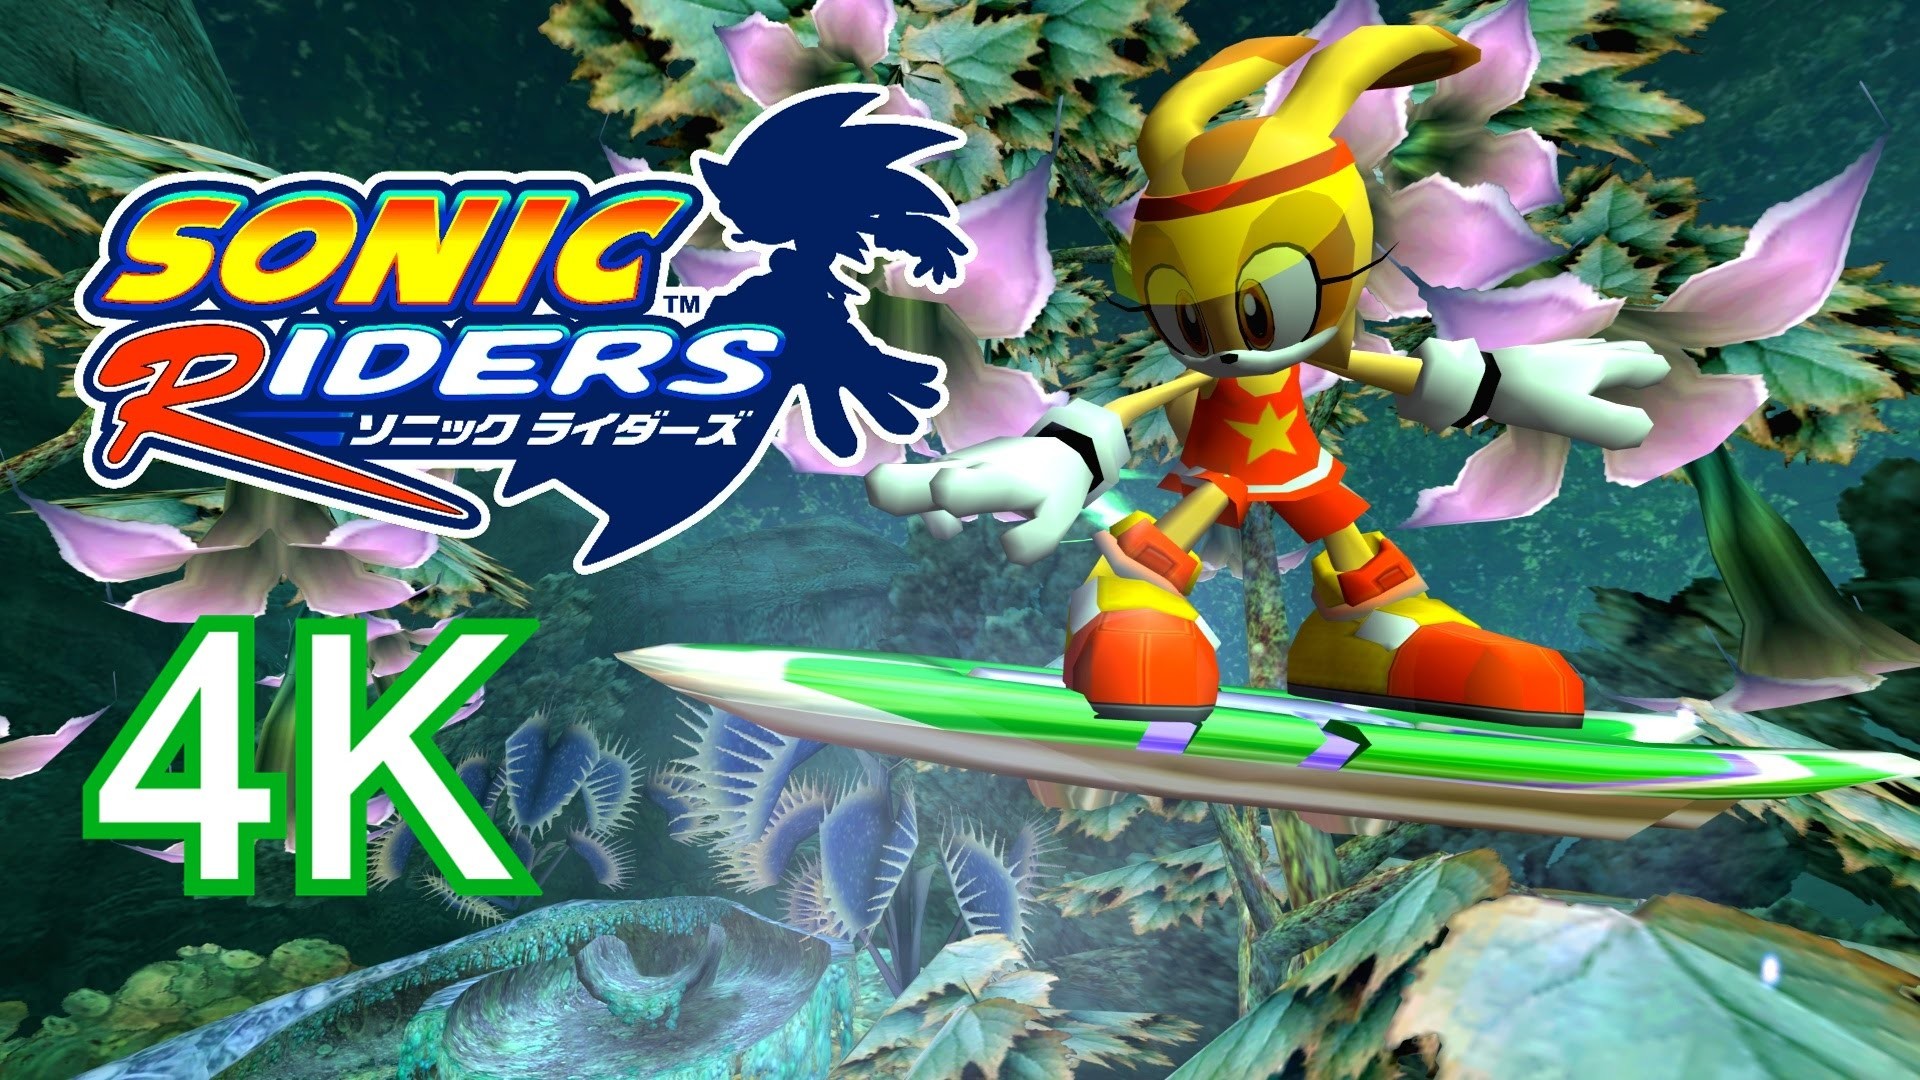 1920x1080 Sonic Riders - White Cave - Cream 4K HD Widescreen 60 fps no HUD - YouTube